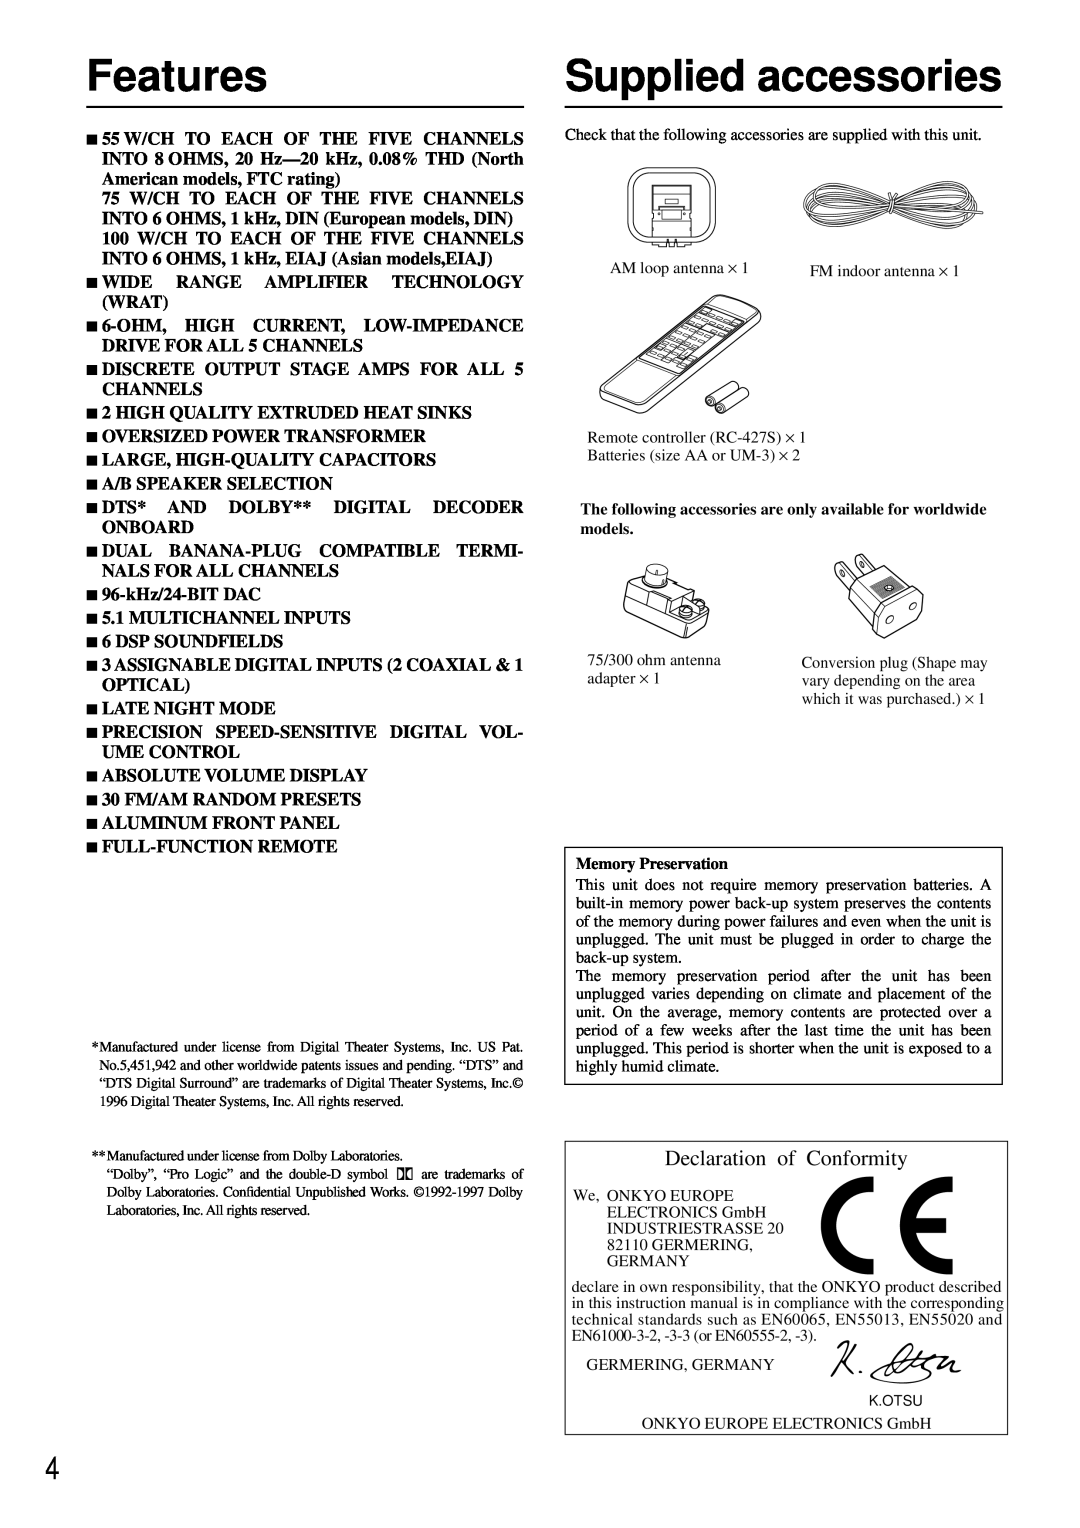 Onkyo TX-DS484 instruction manual Features, Supplied accessories, Declaration of Conformity 